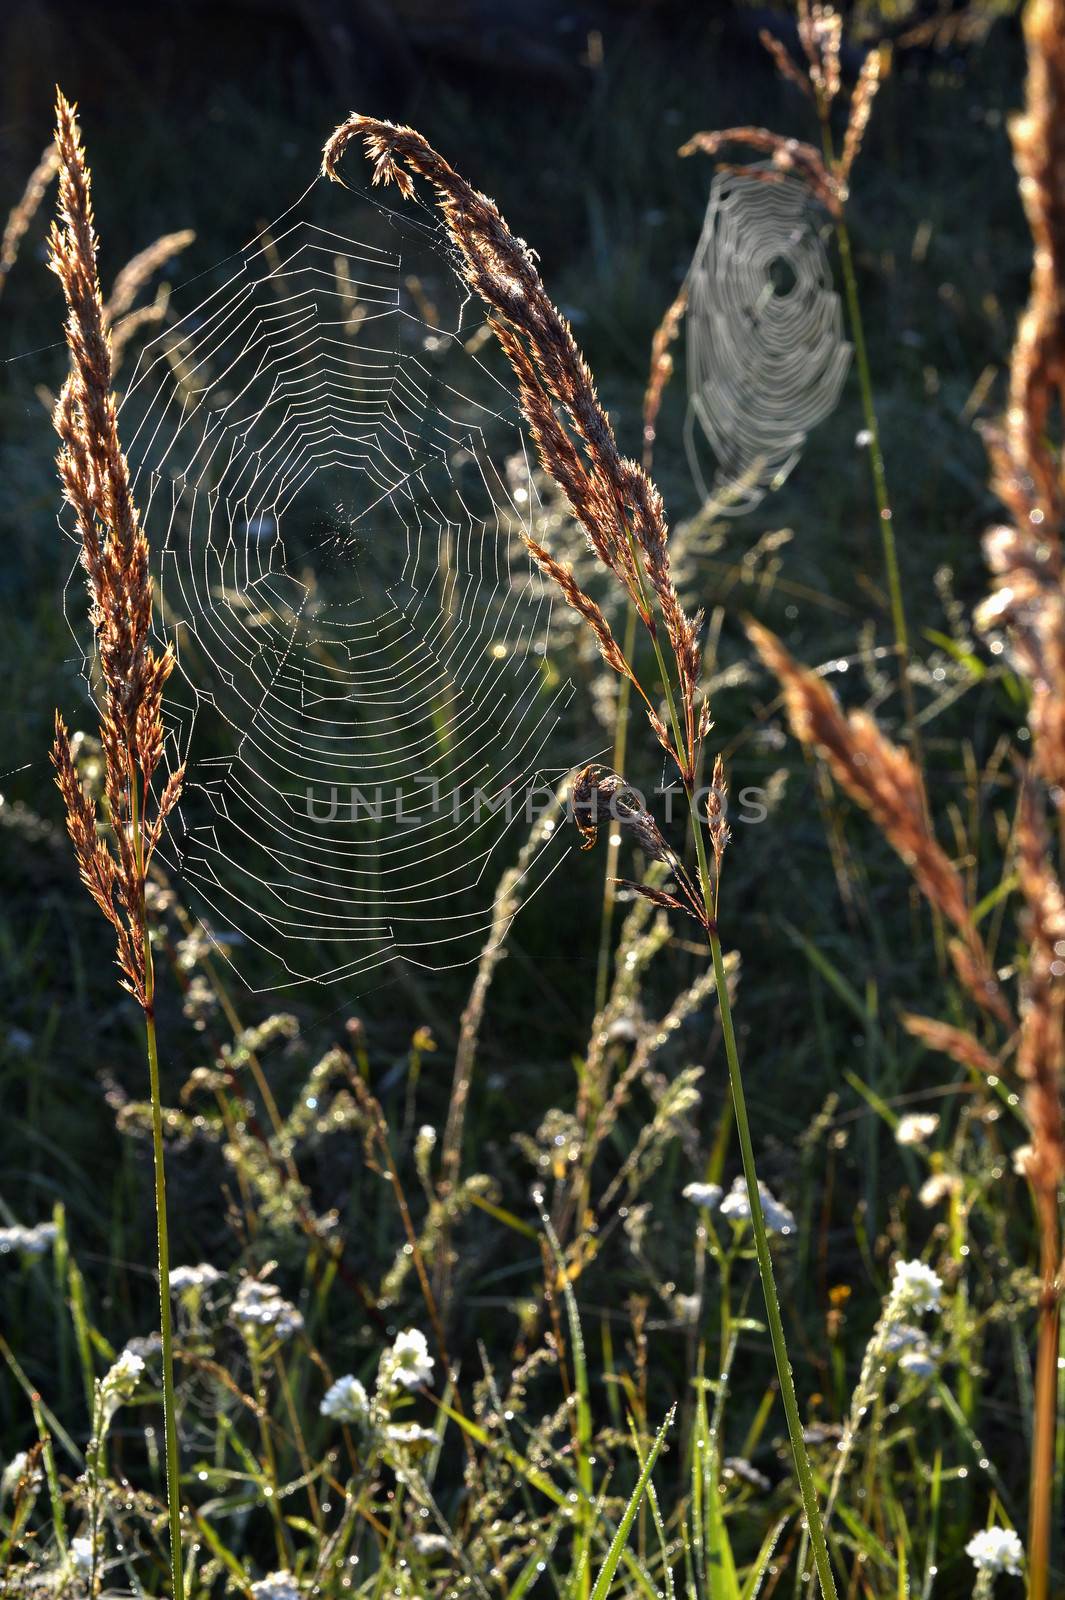 Spider web on a meadow in the rays of the rising sun.  Cobweb on the autumn meadow backlit by the rising sun.